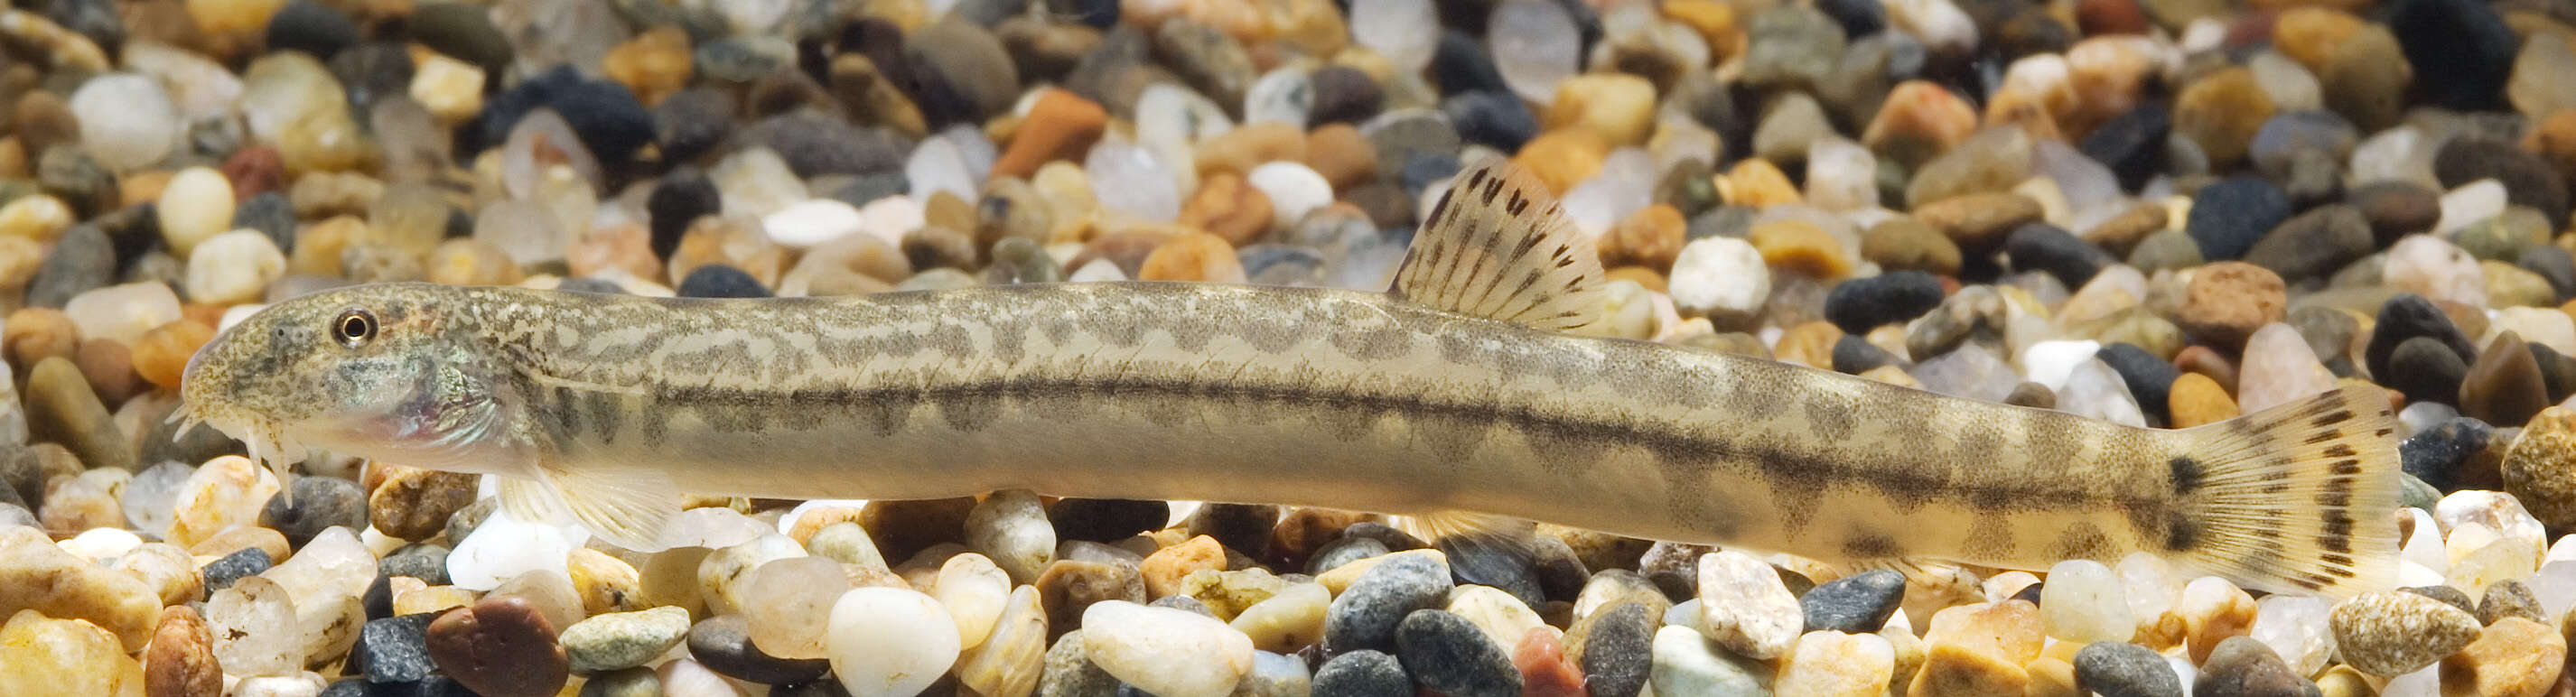 Image of Loaches